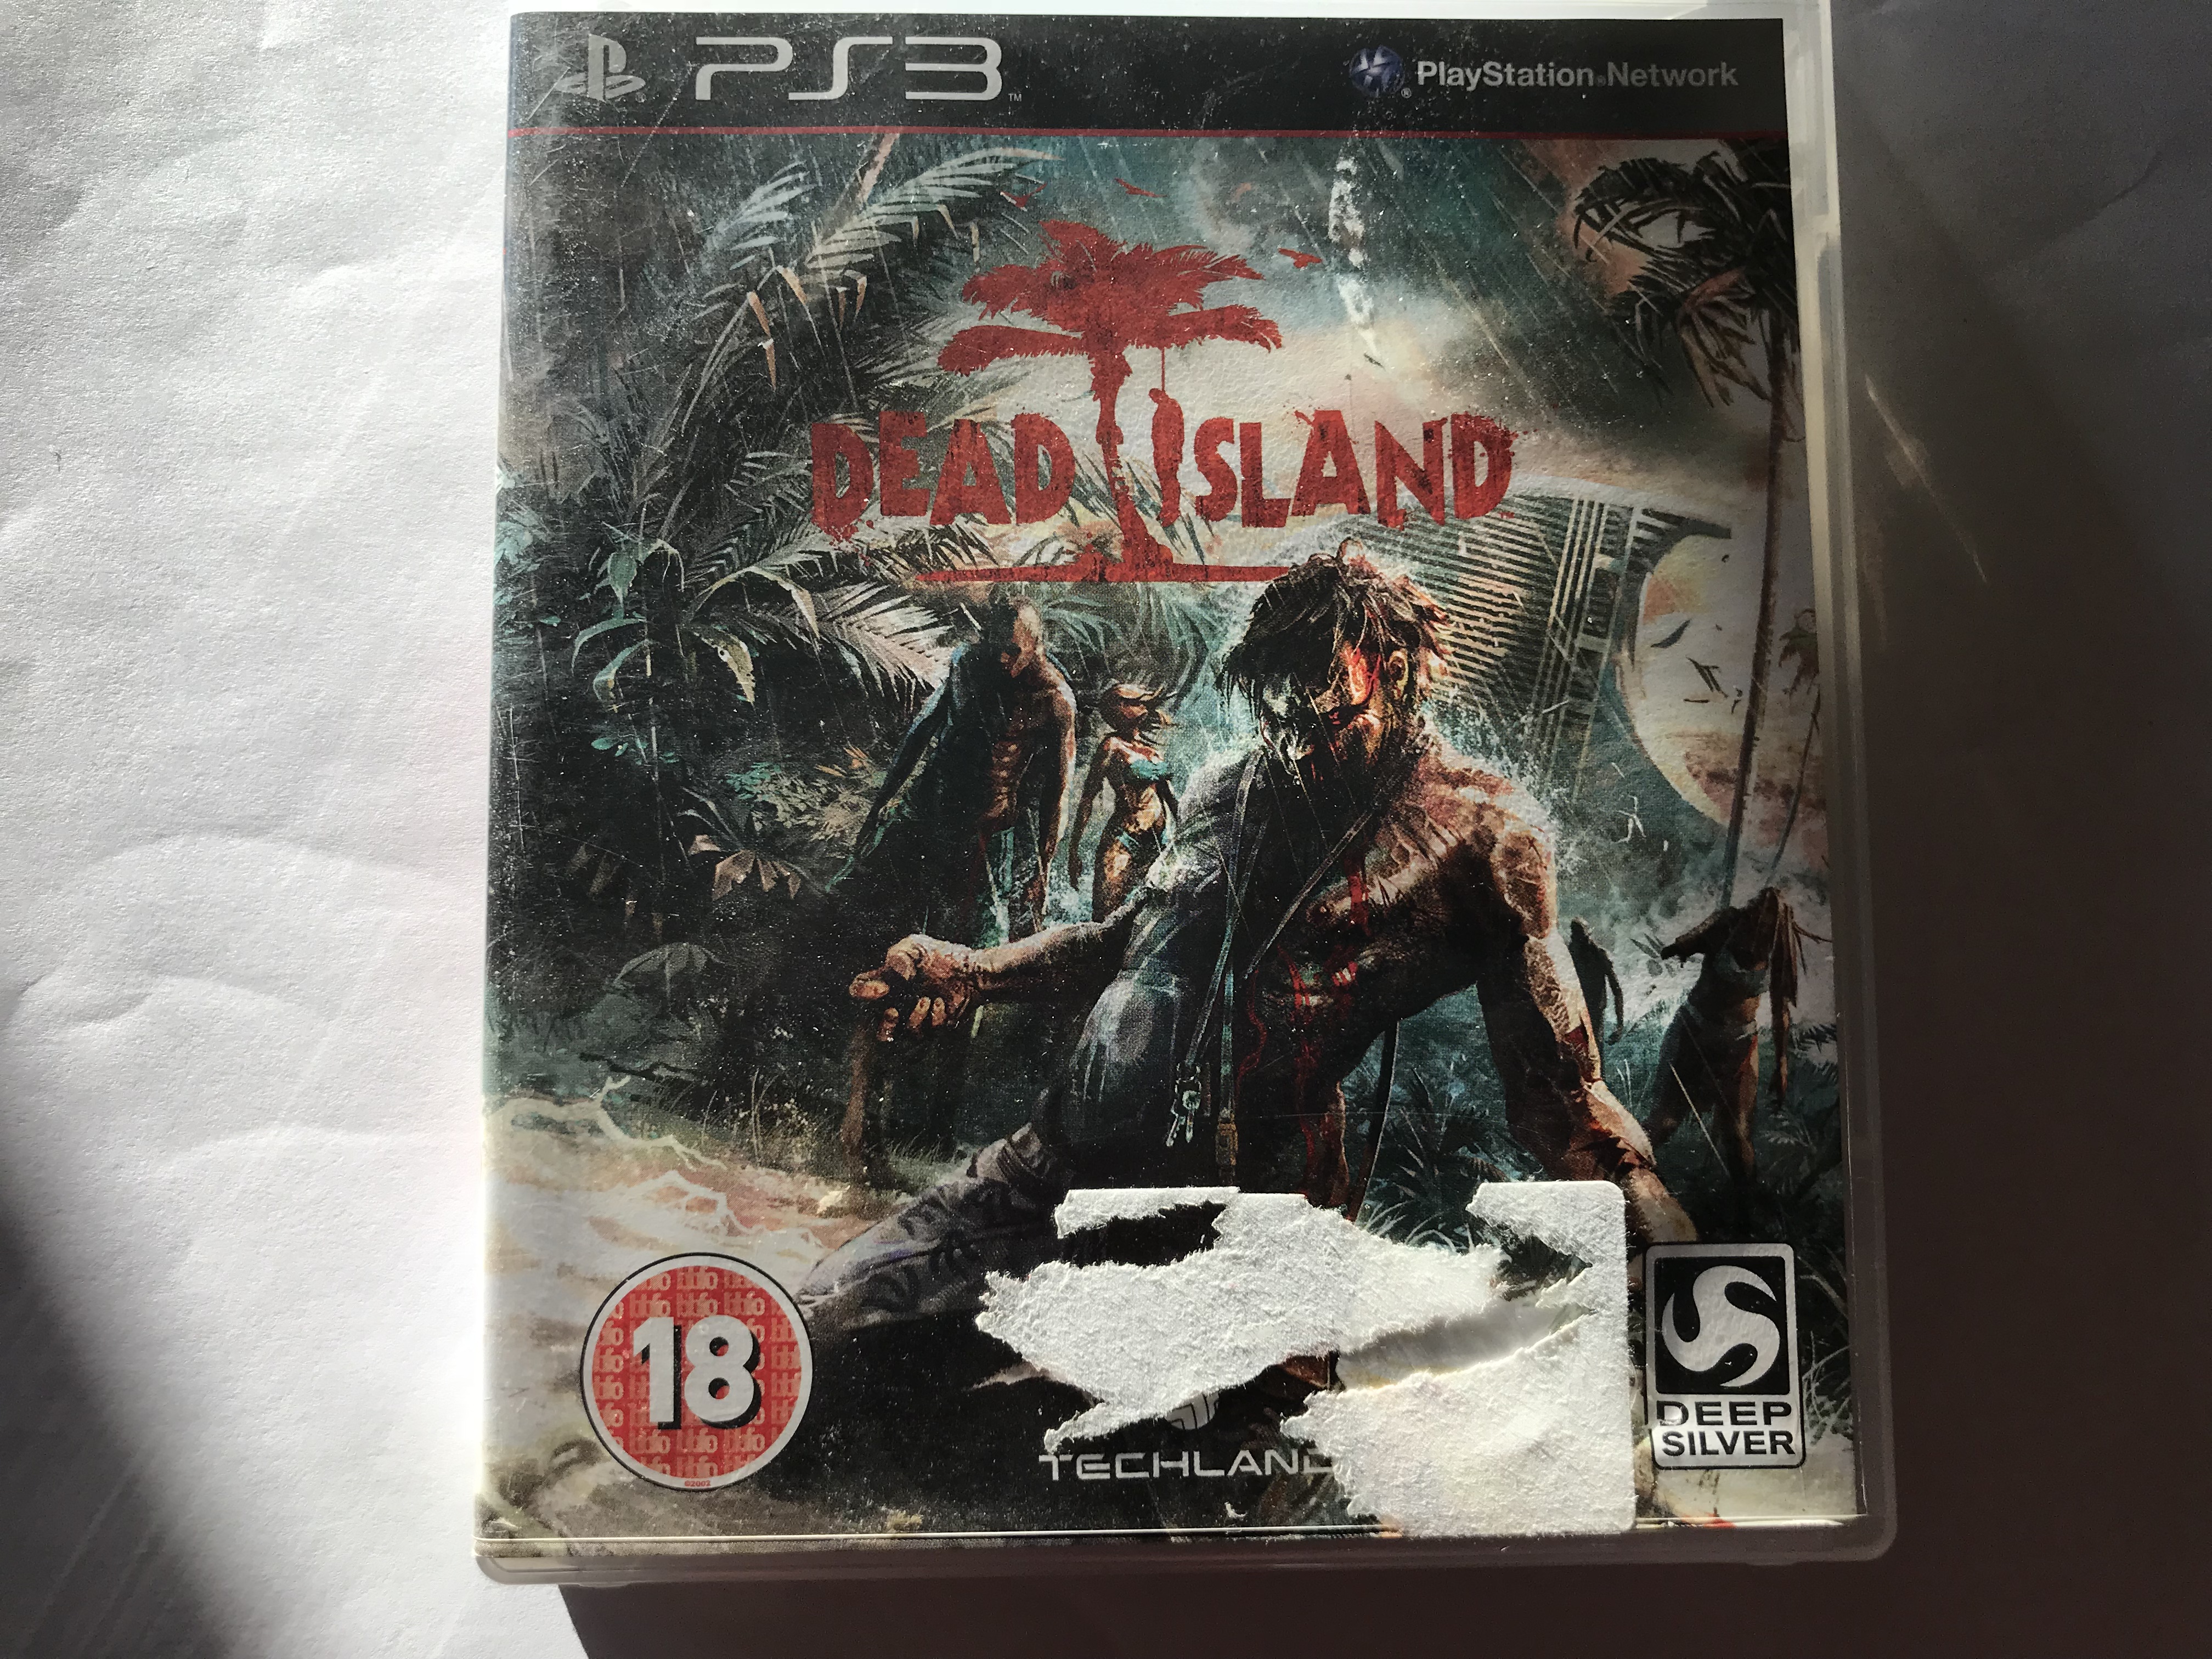 dead island ps3 game review